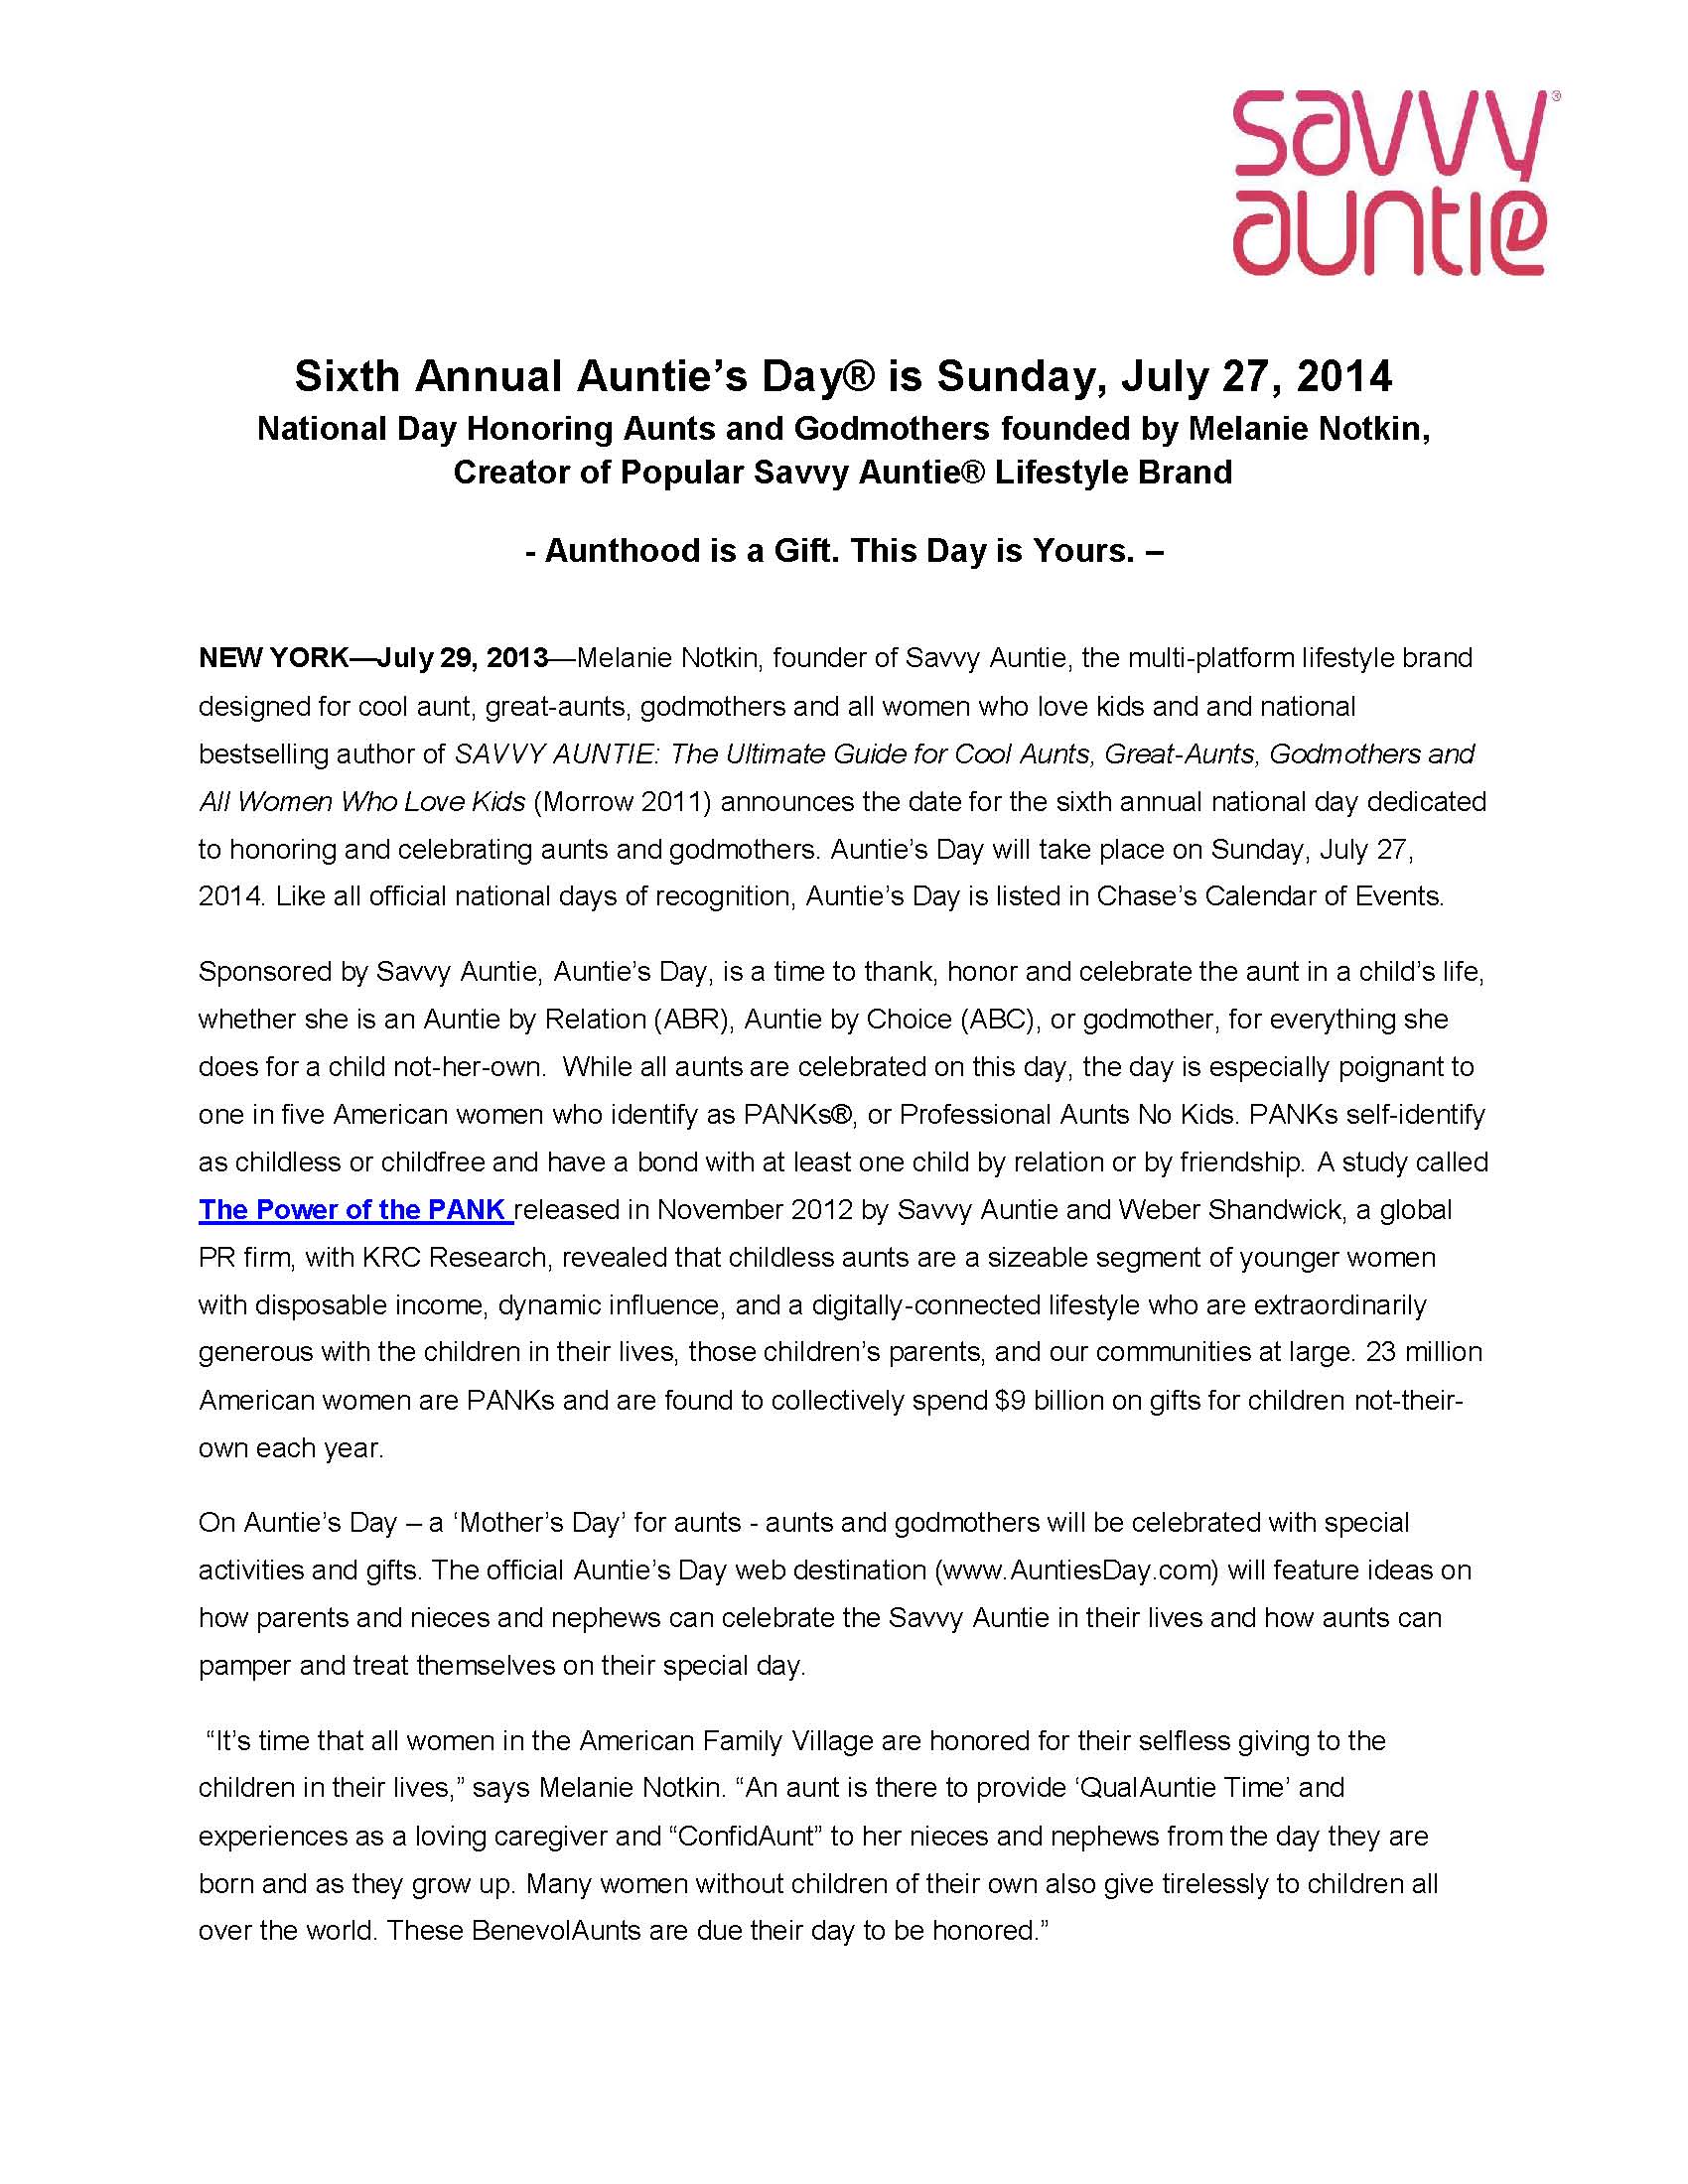 6th Annual Auntie's Day Announced